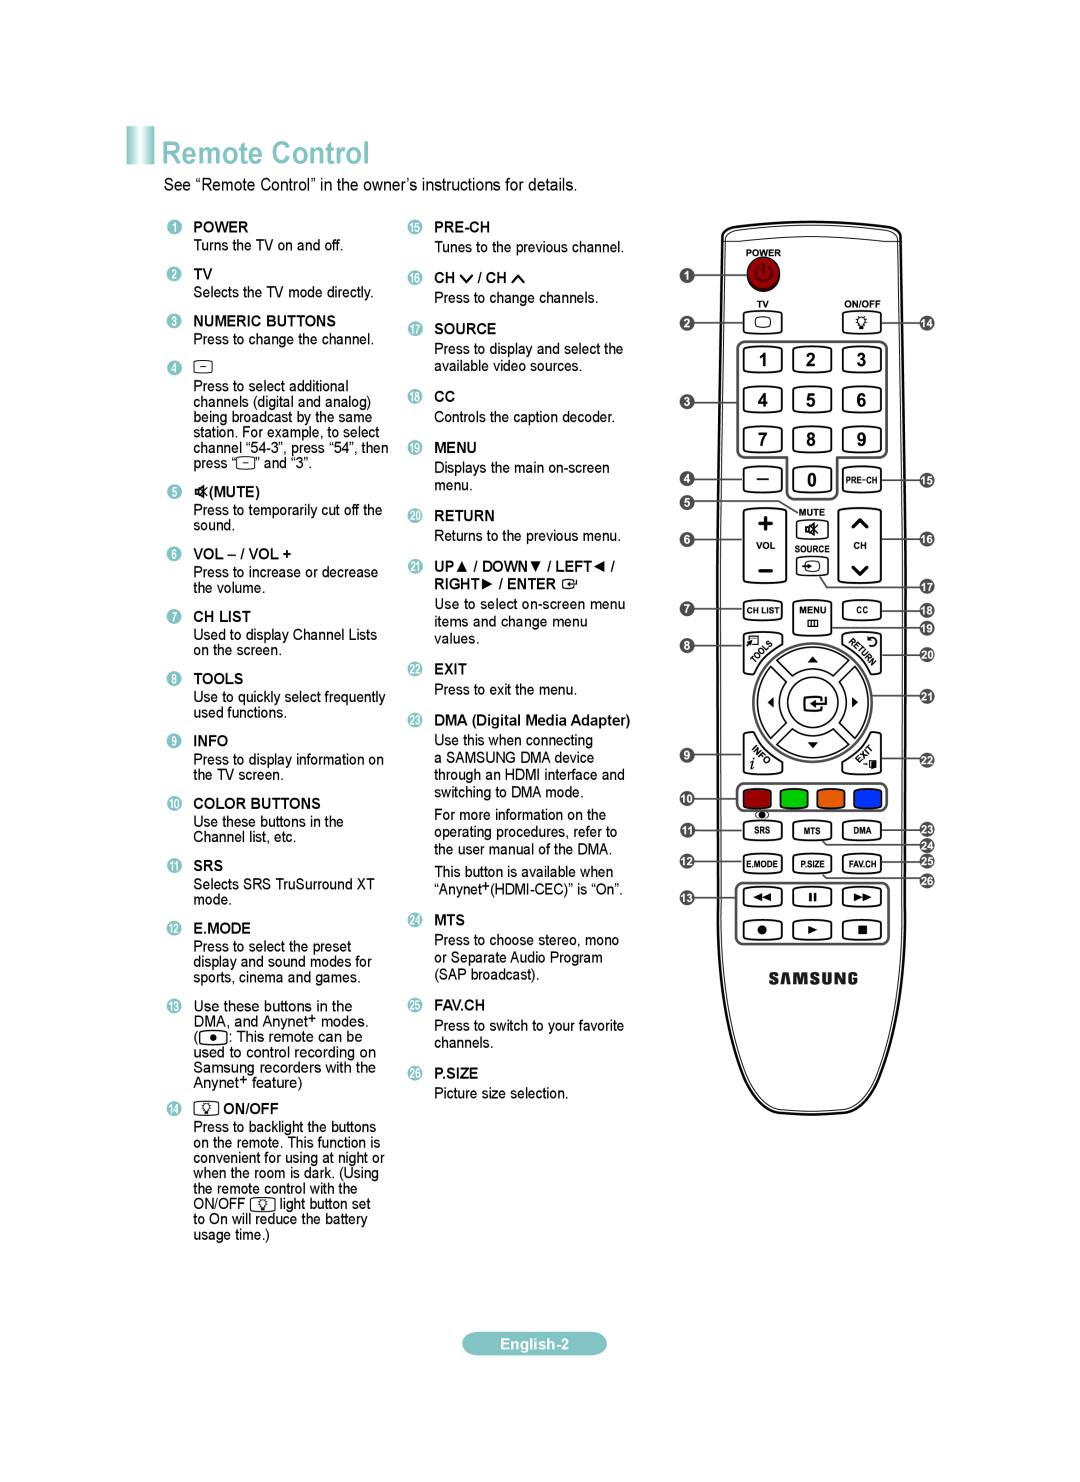 Samsung LN52A530PF, LN40A530PF, LN37A530PF See “Remote Control” in the owner’s instructions for details, English 